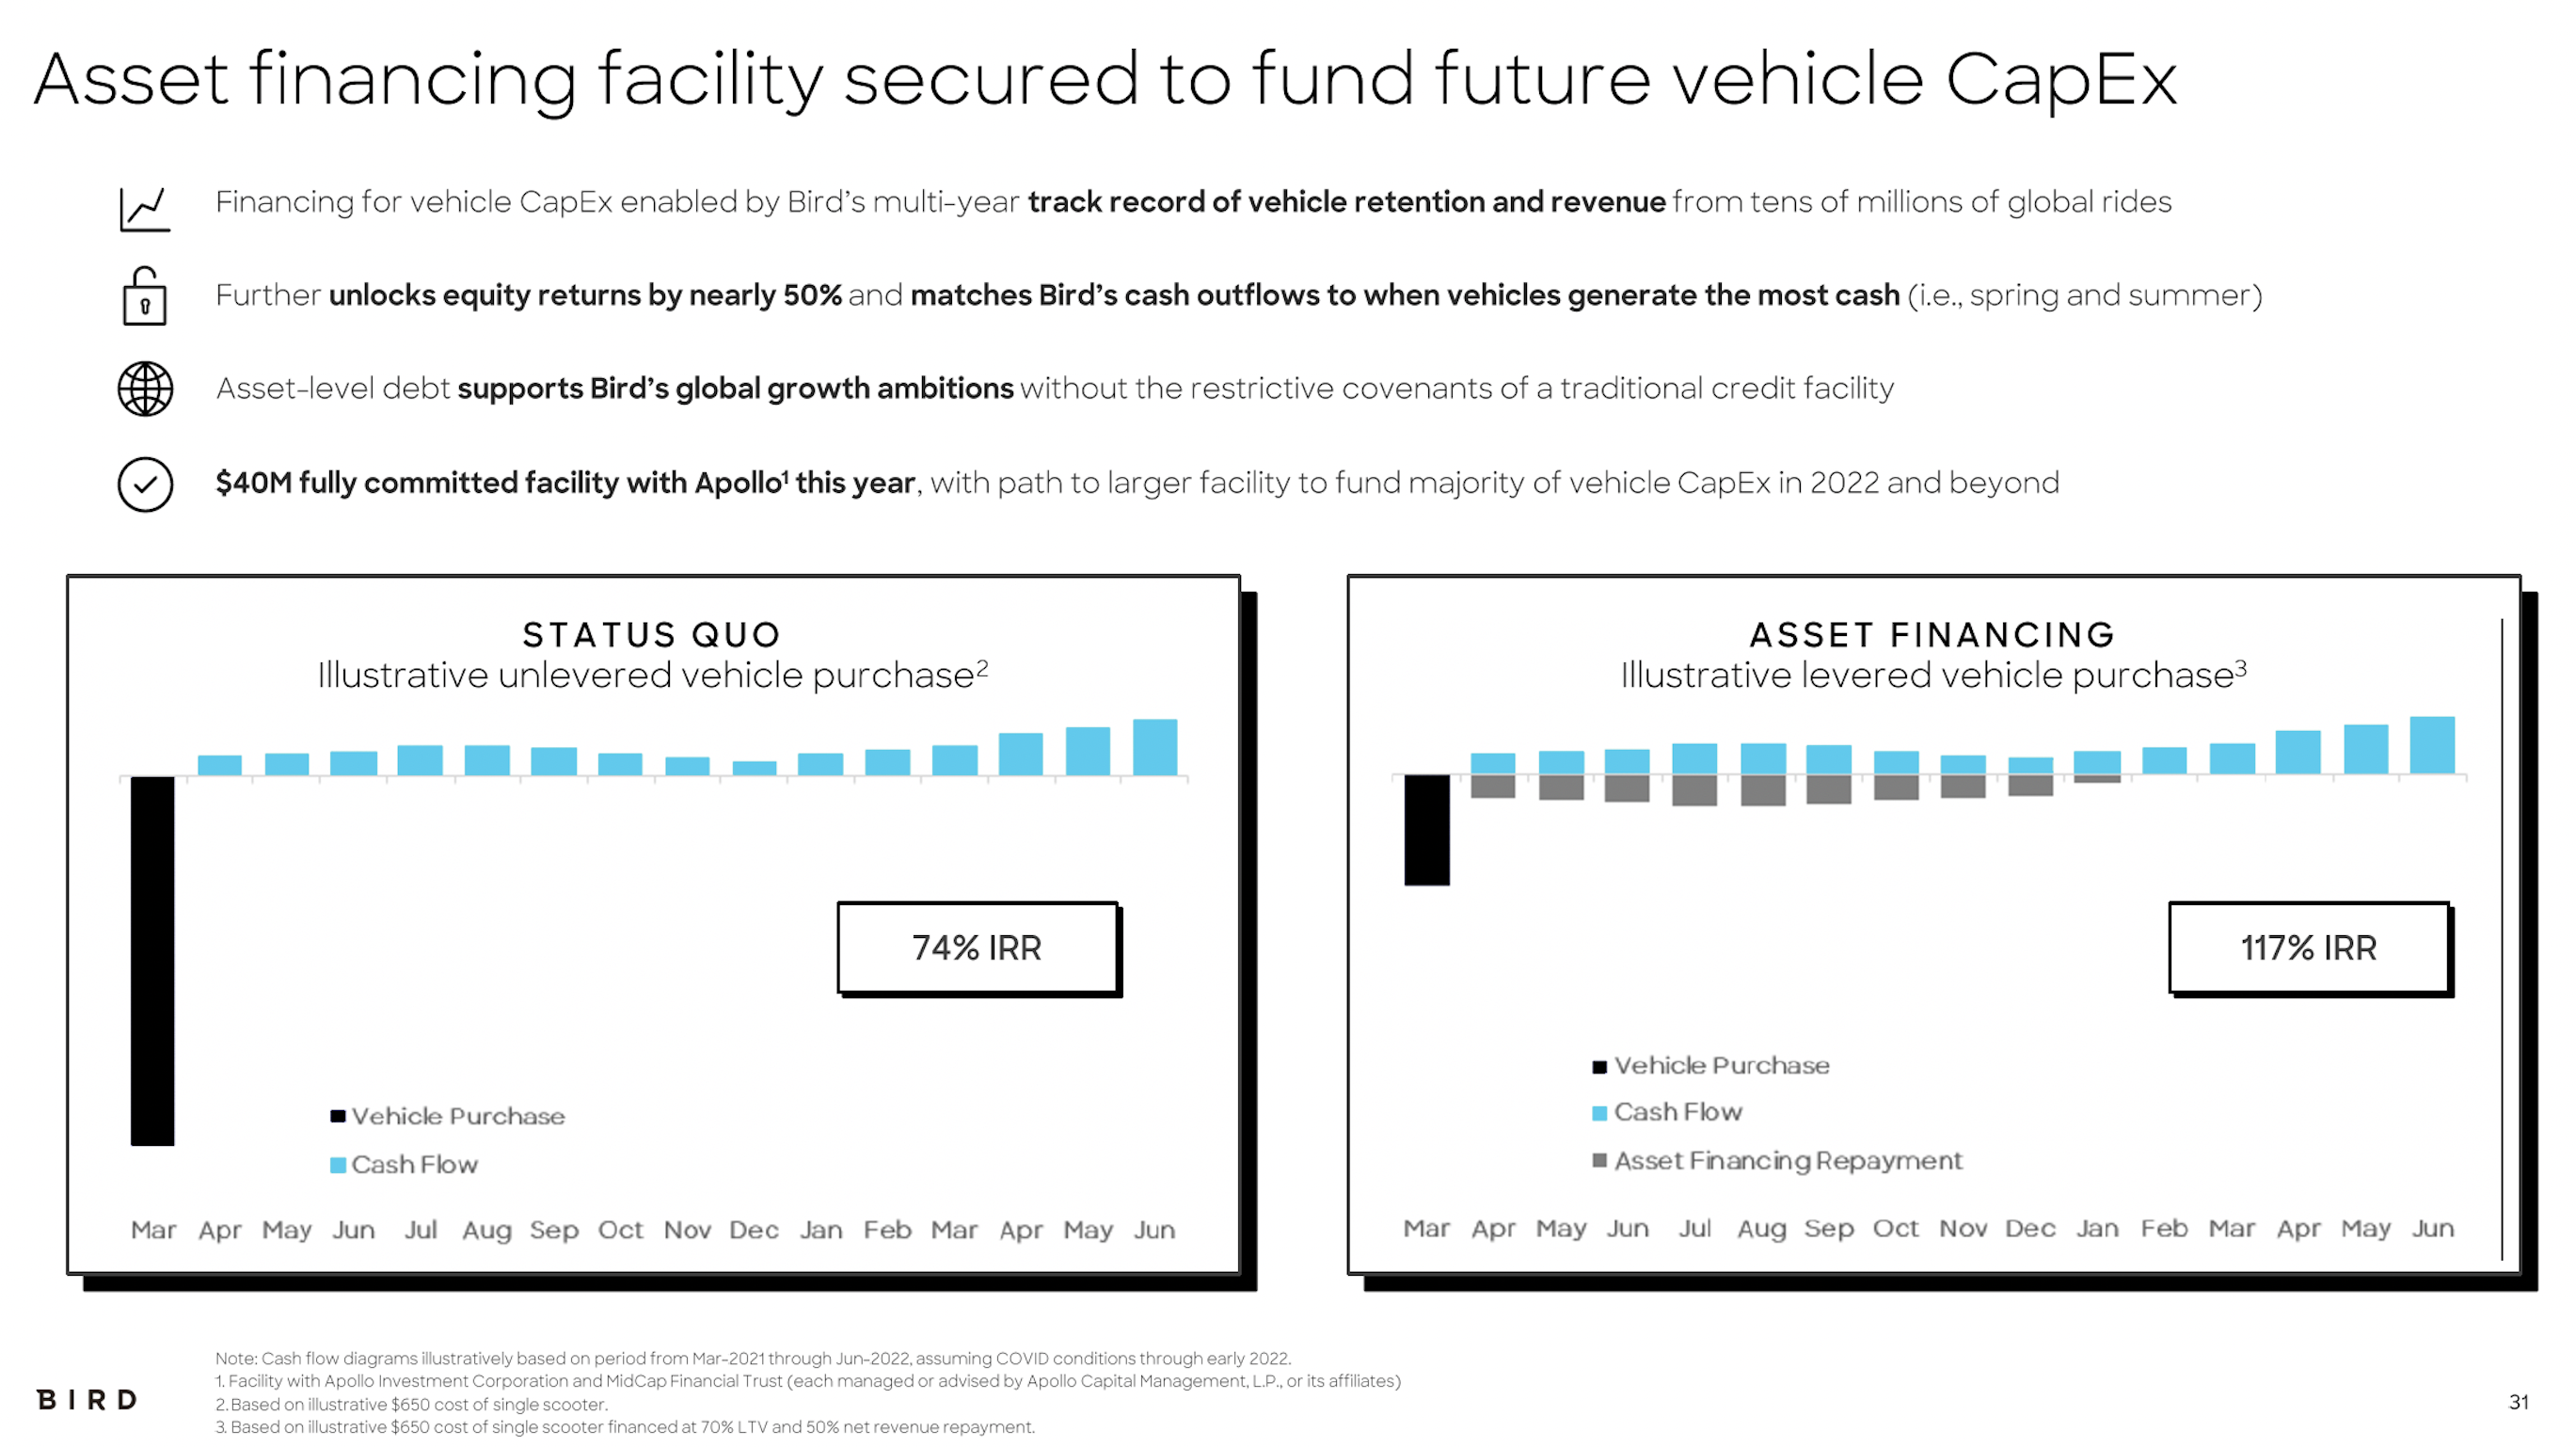 Slide from bird investor deck about asset financing facility